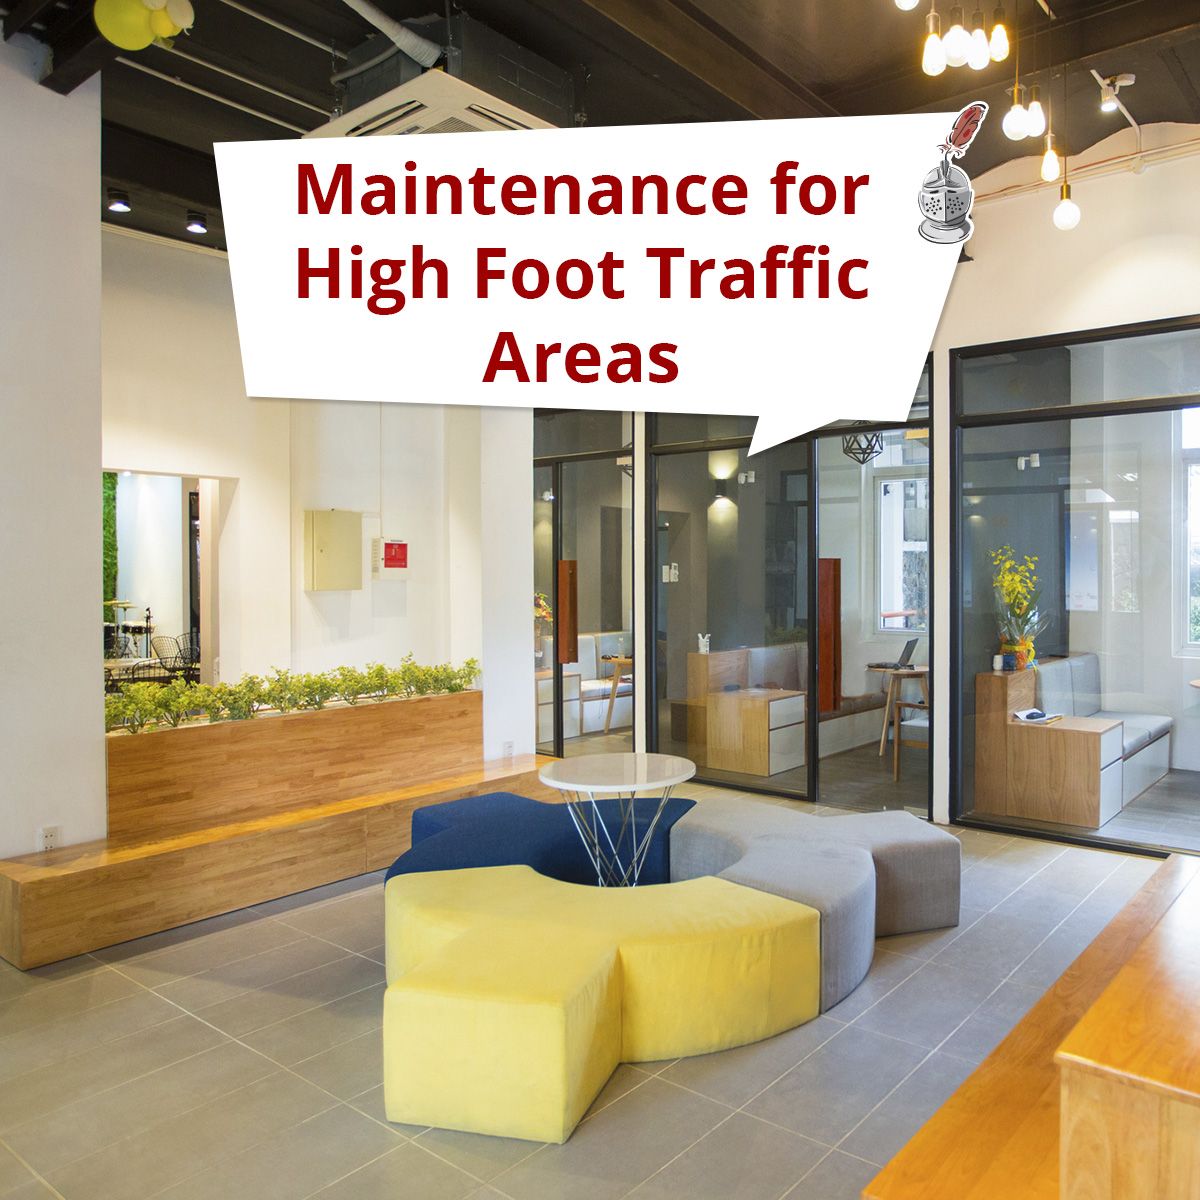 Maintenance for High Foot Traffic Areas